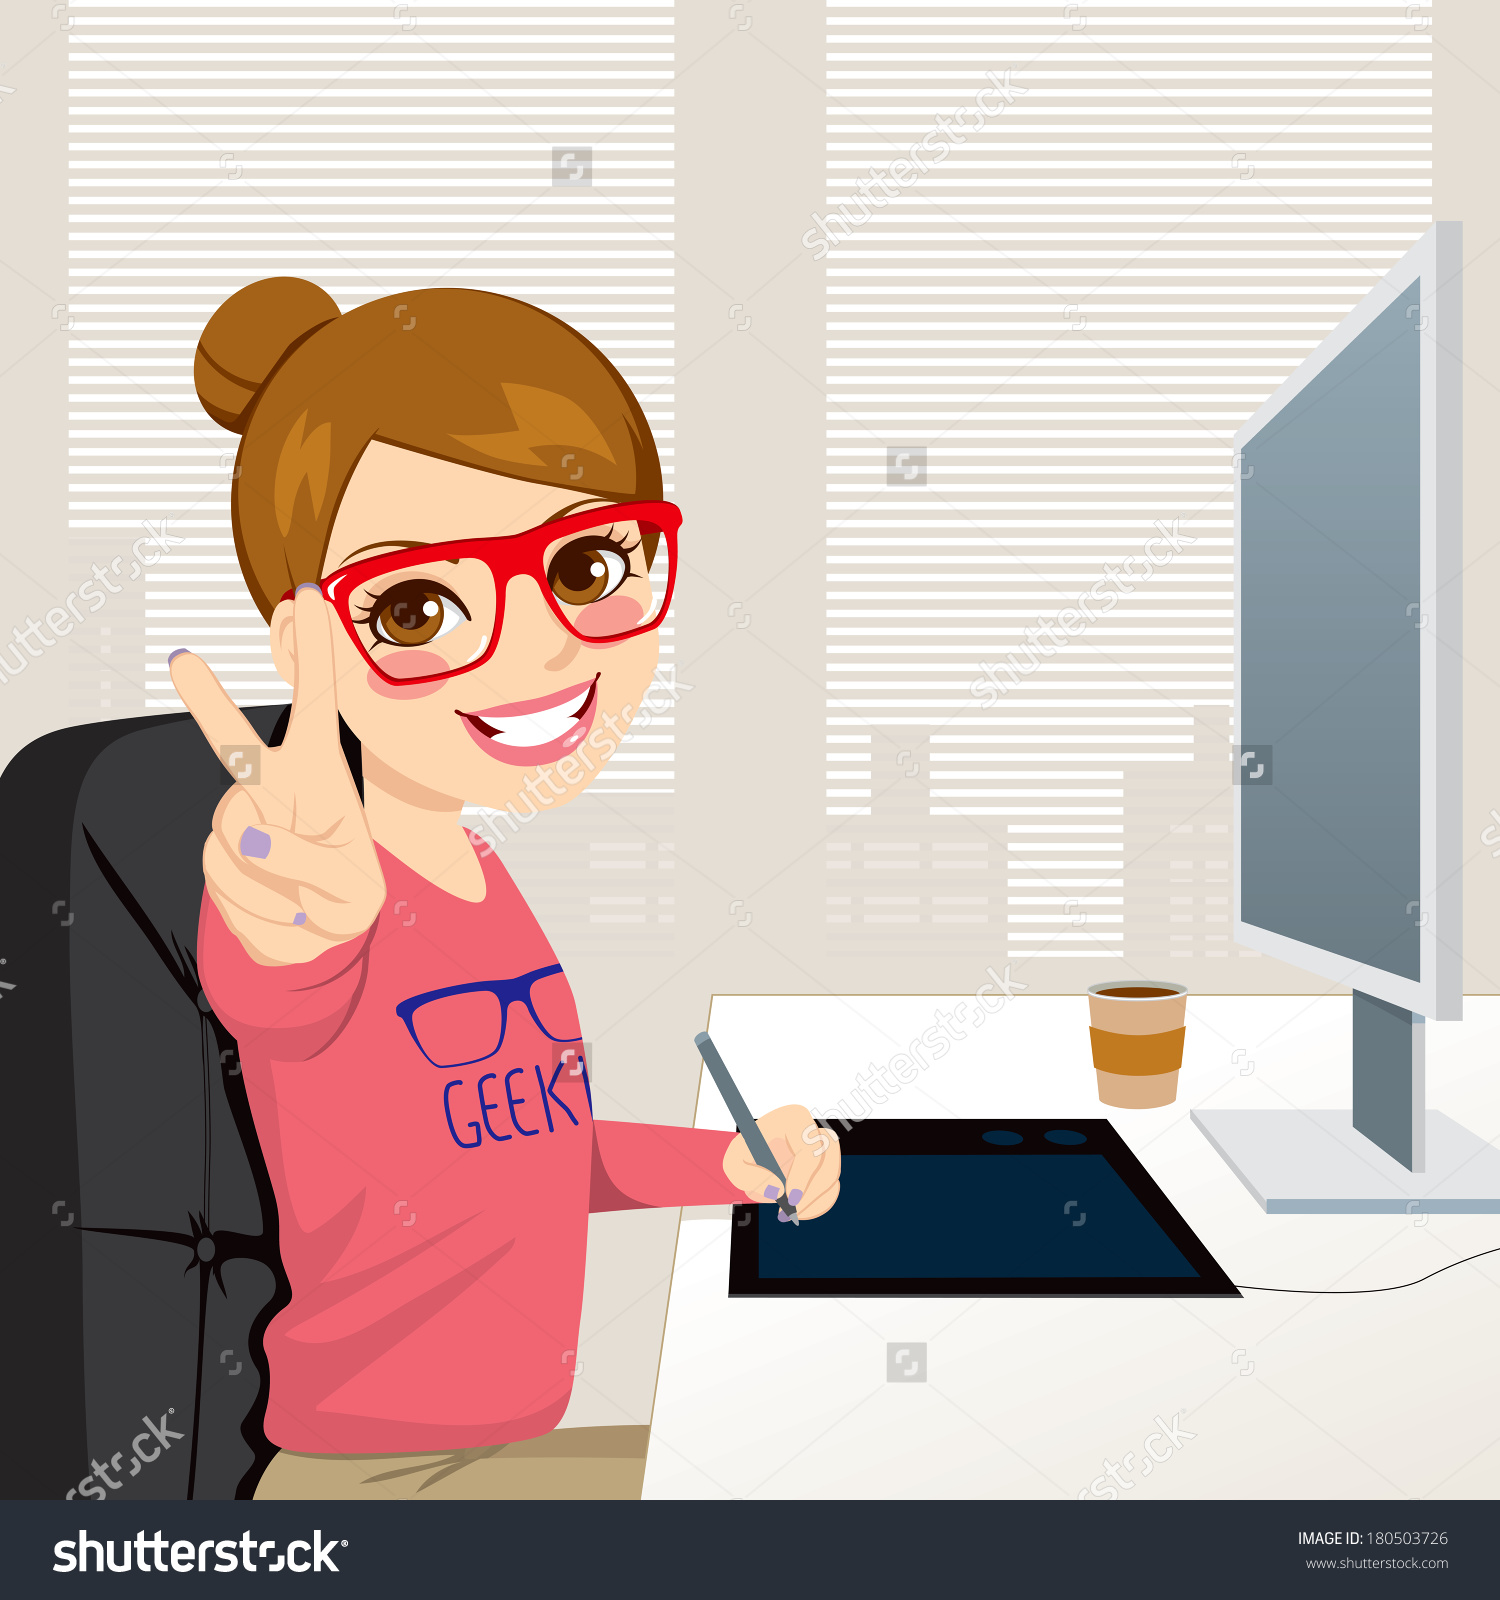 woman working hard clipart - Clipground